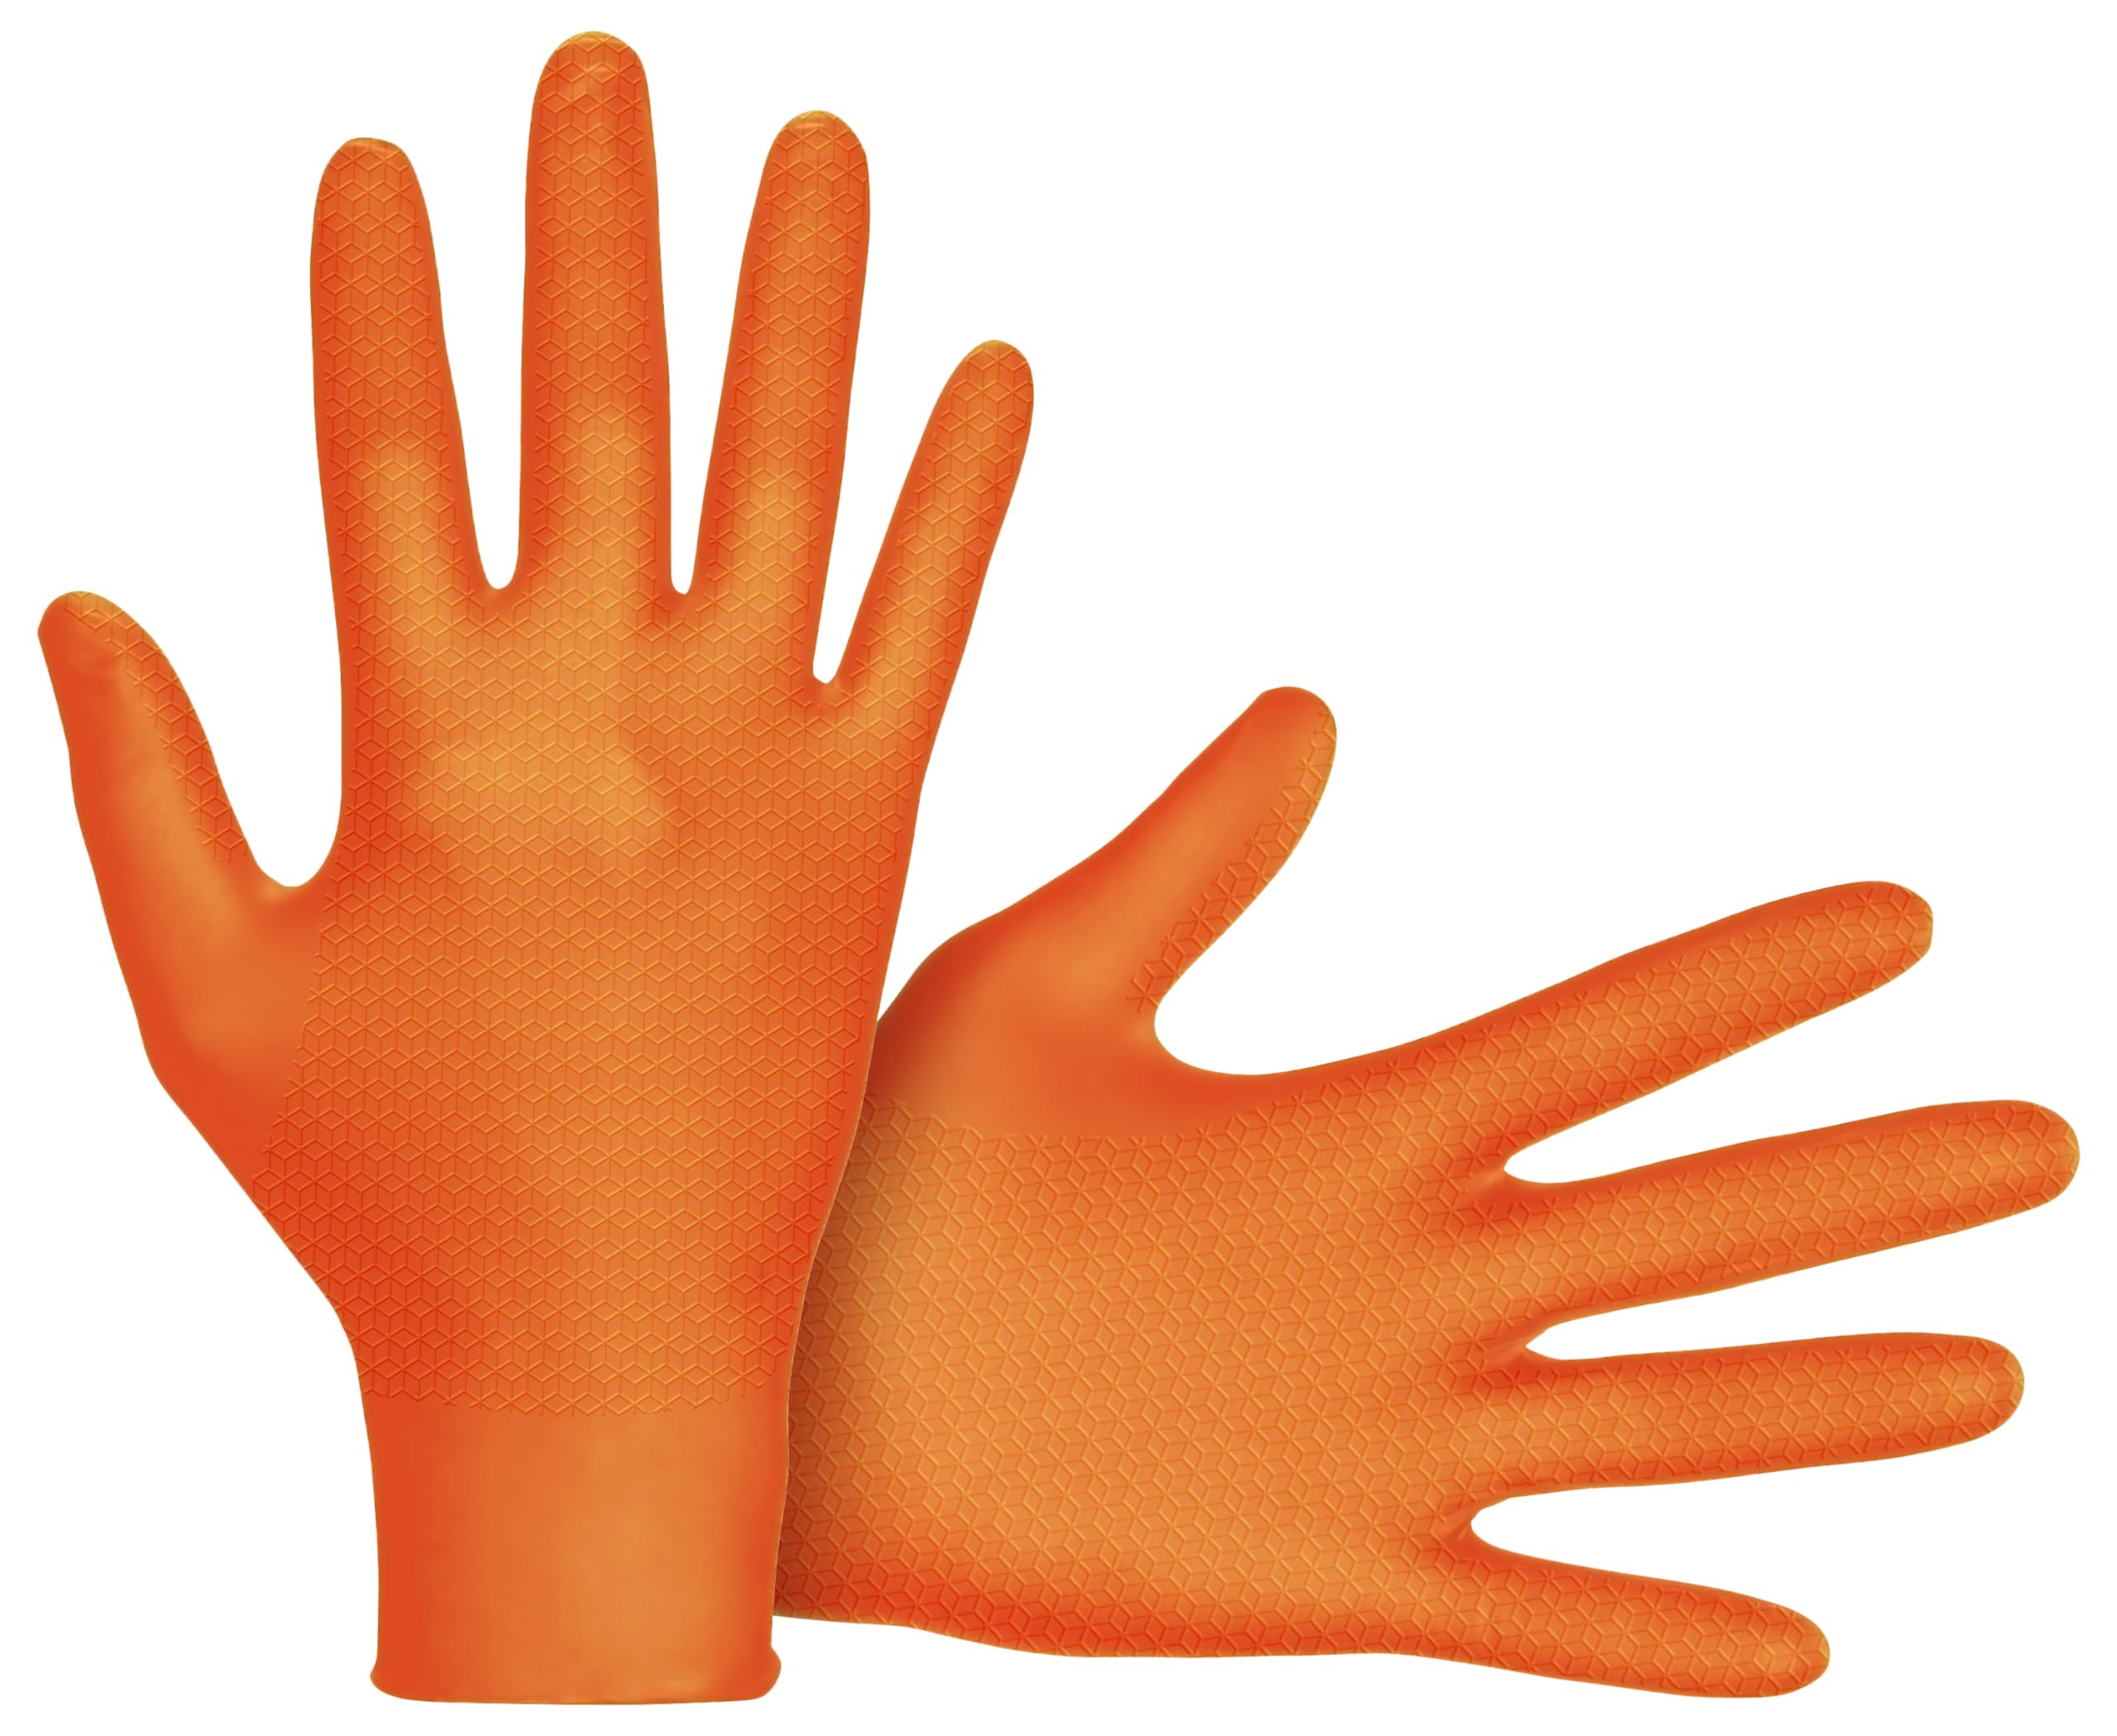 Astro-Grip Powder-Free Exam Grade Nitrile Disposable Gloves. Size X-Large, Orange, 7 mil Thickness. Chemical and Puncture Resistant. Single-Use. Pack of 100. (66474)